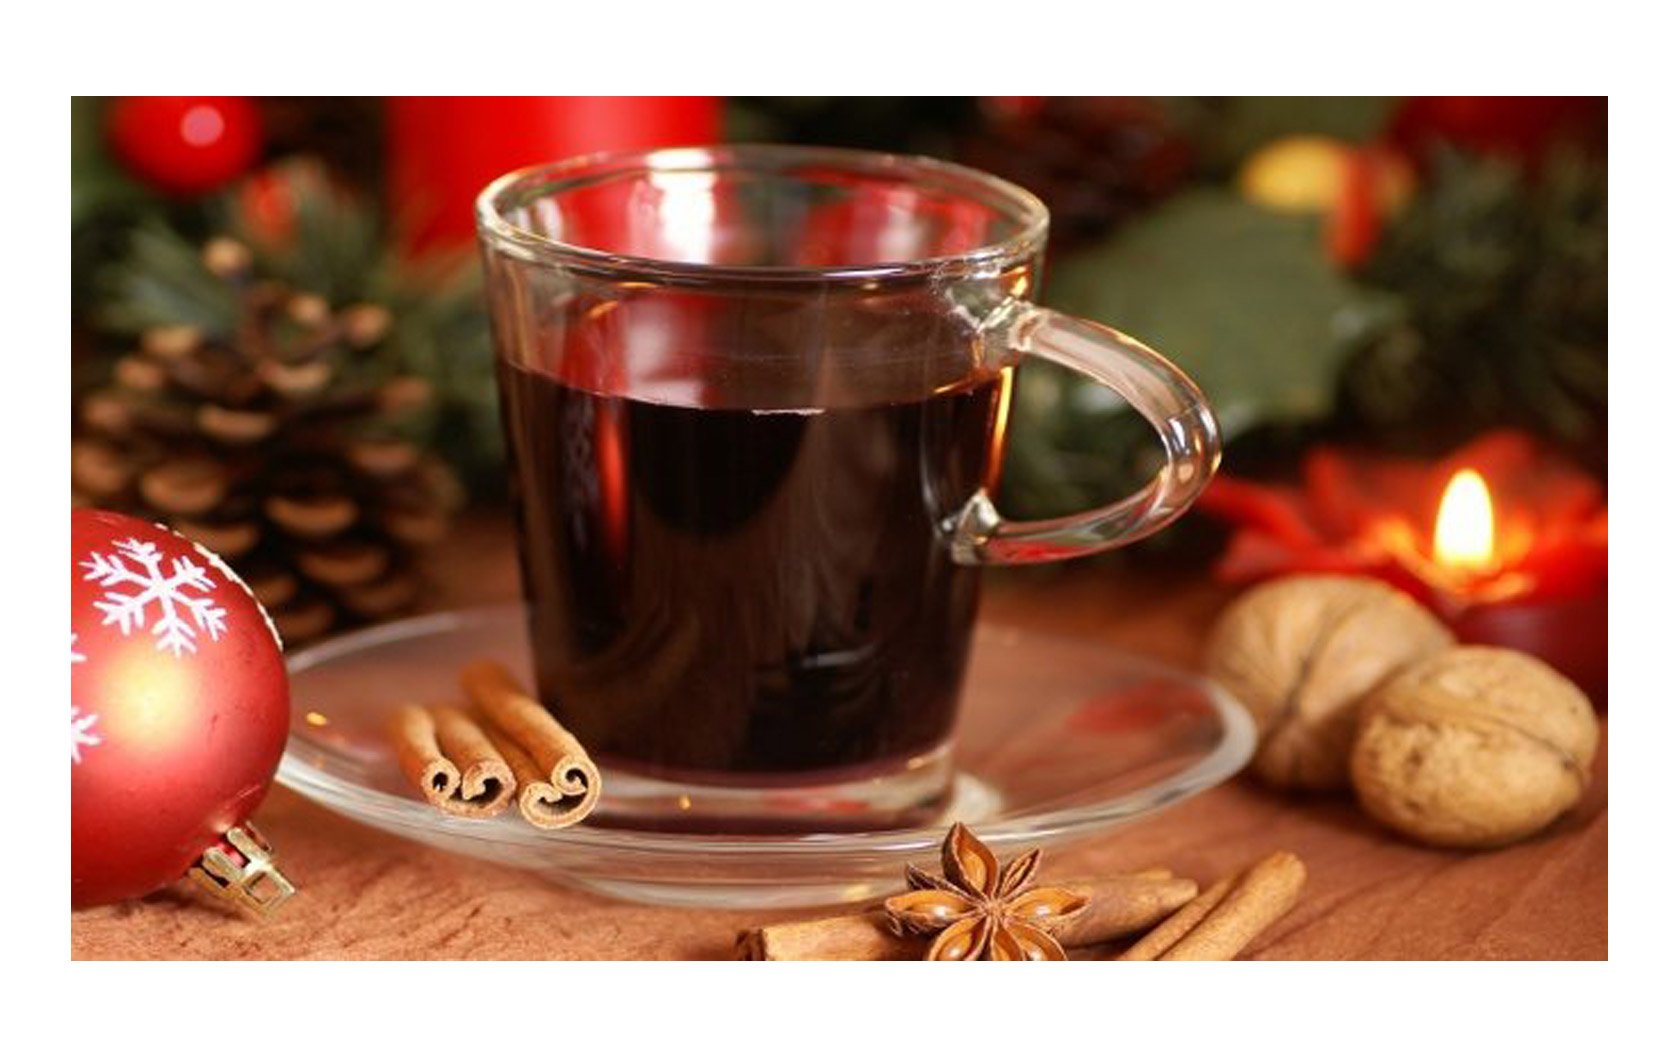 Recipe for Gluhwein (Traditional Mulled Wine)